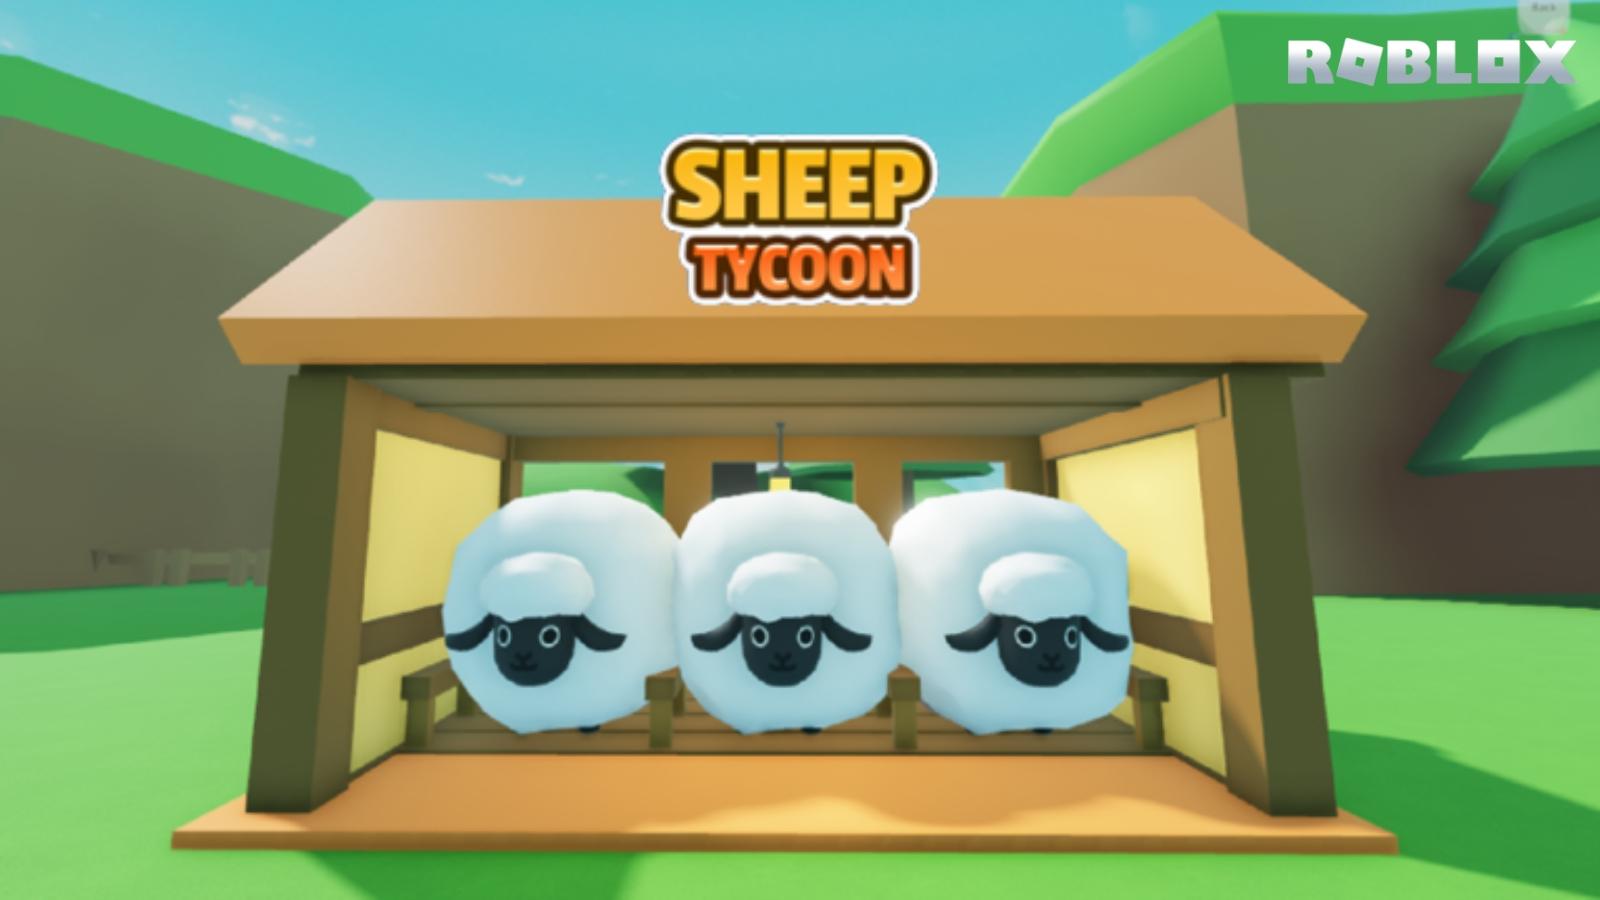 Sheep Tycoon Roblox cover